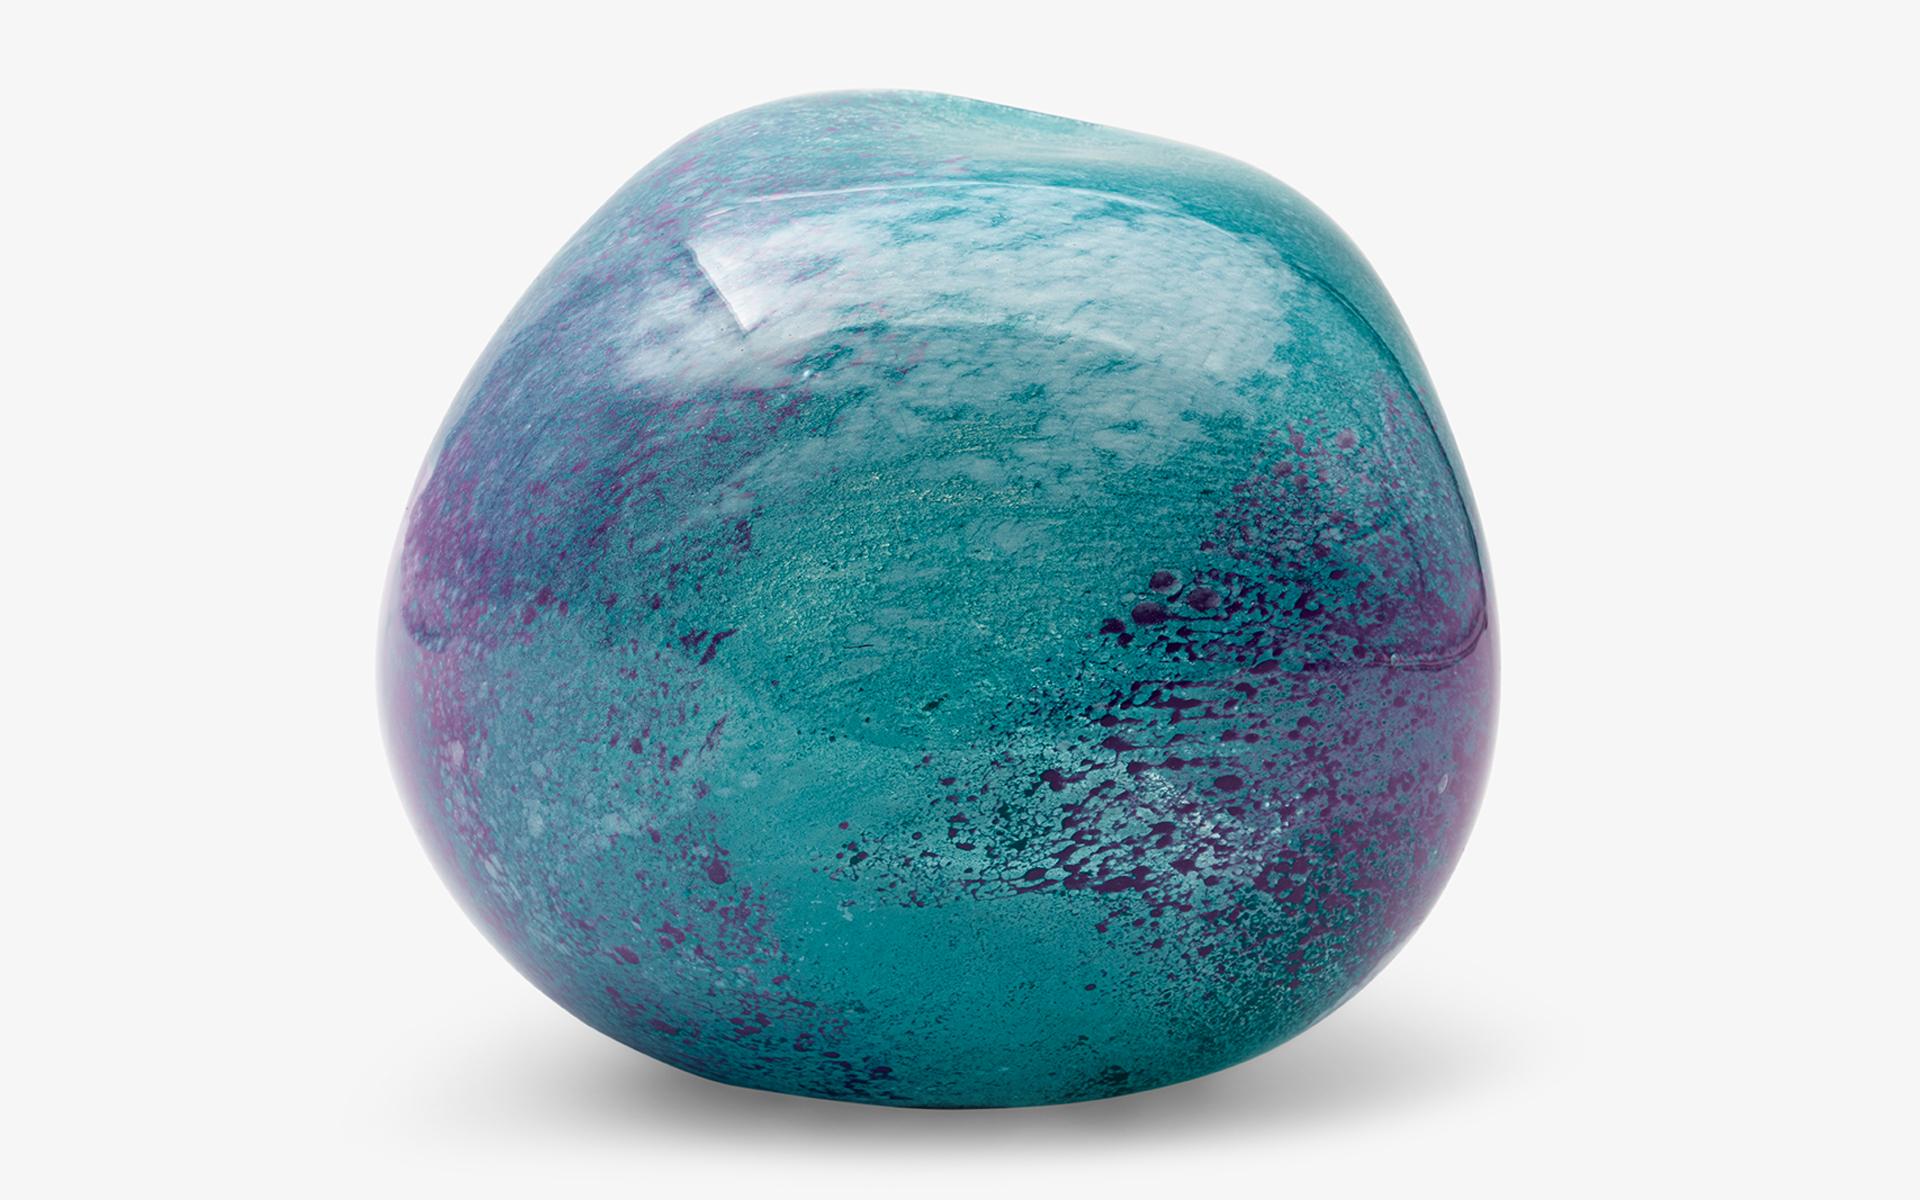 Organic Modern Turquoise and Lilac Color Amorphous Blown Glass Vase No:1